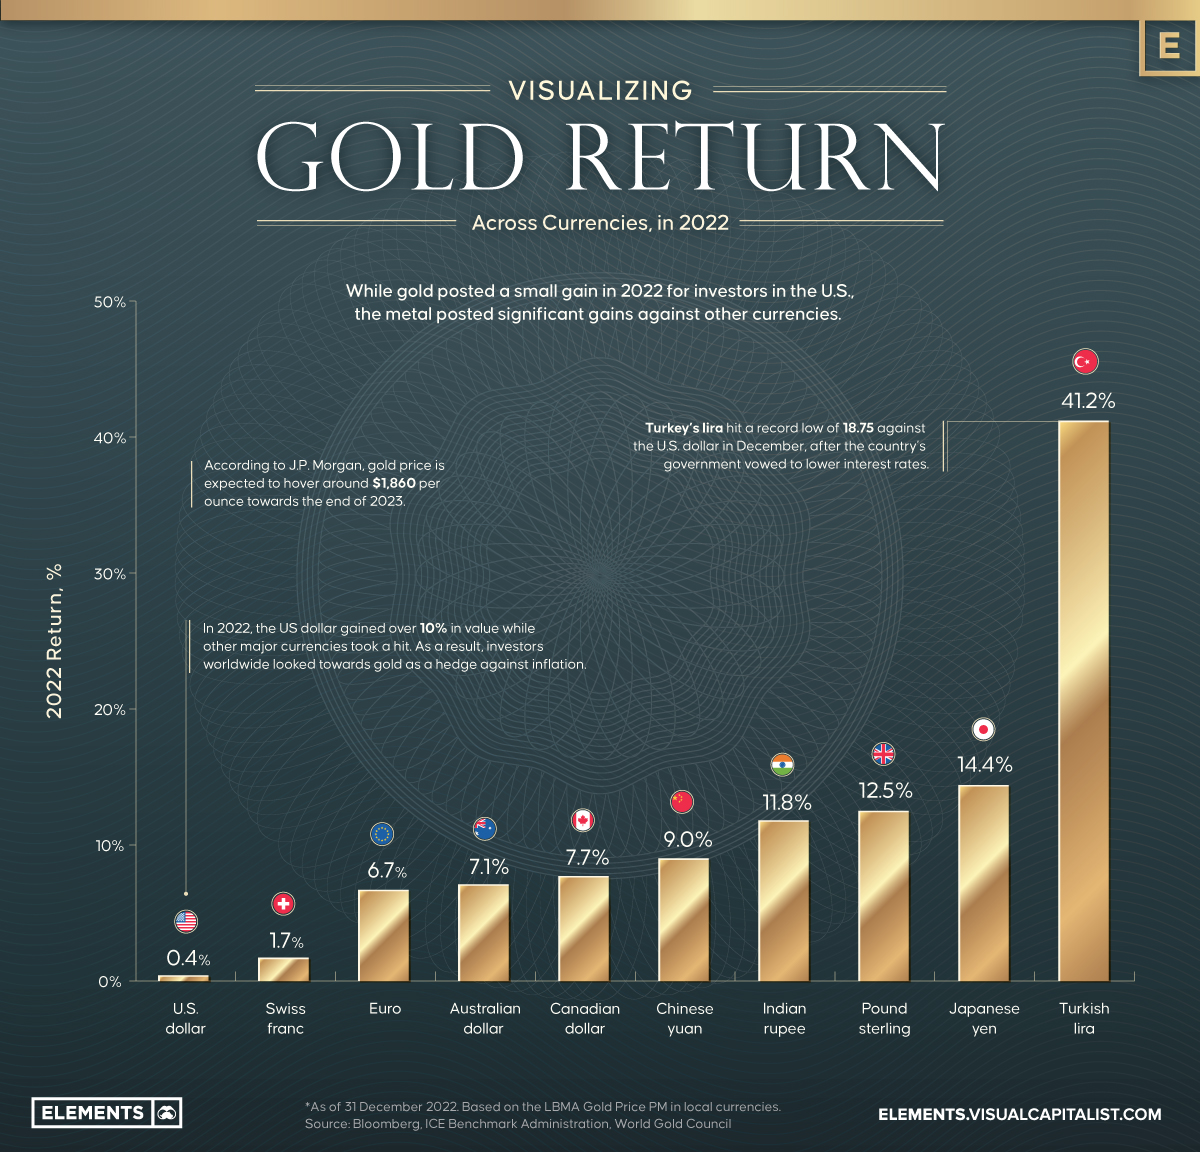 Visualizing Gold Return Across Currencies